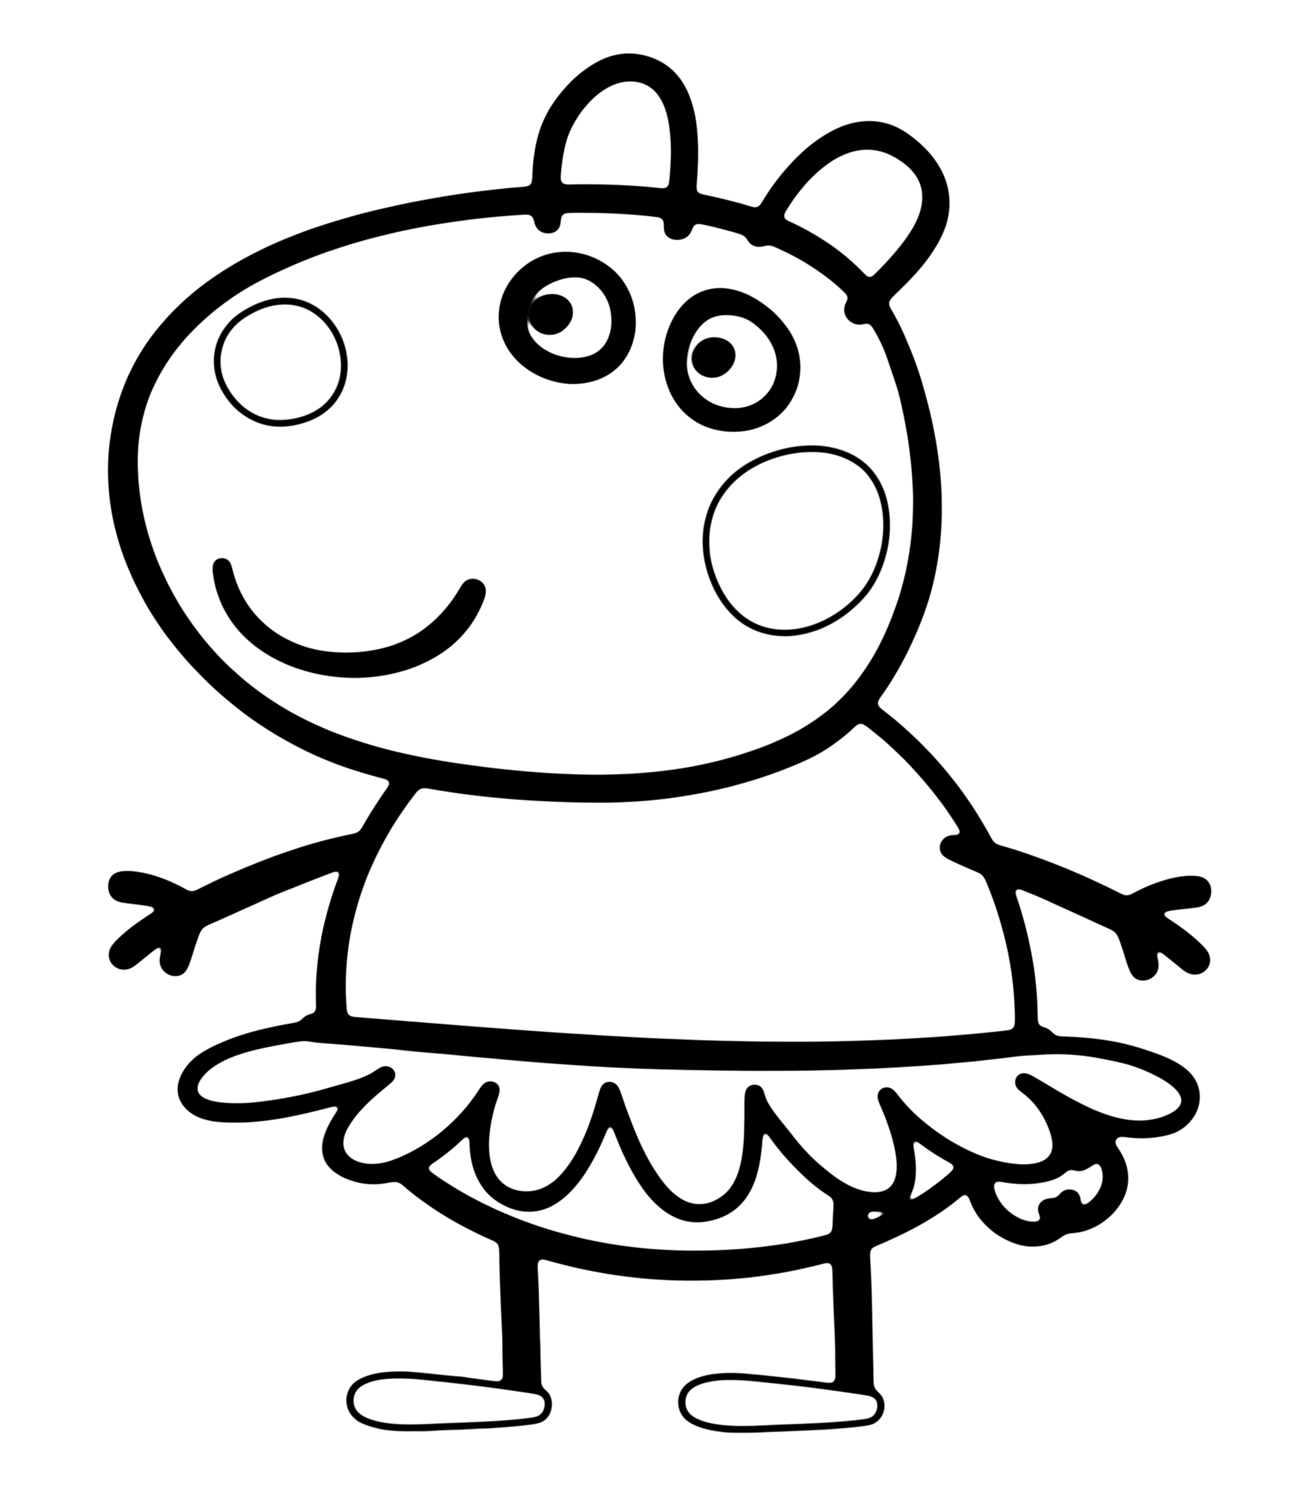 7 Pics of Pig Mask Coloring Page - Printable Pig Mask Template ...